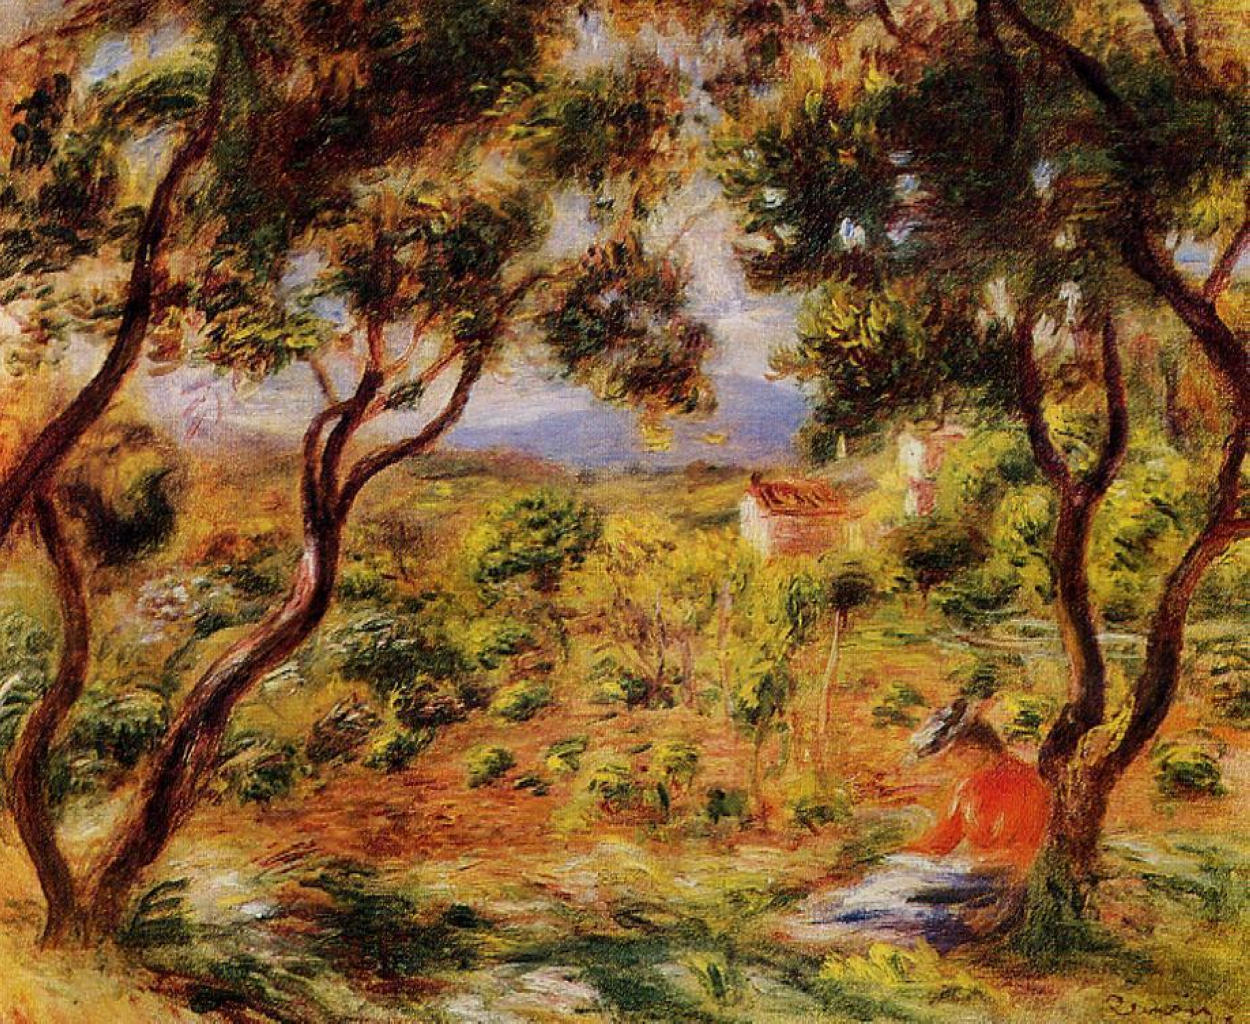 The Vineyards of Cagnes - Pierre-Auguste Renoir painting on canvas